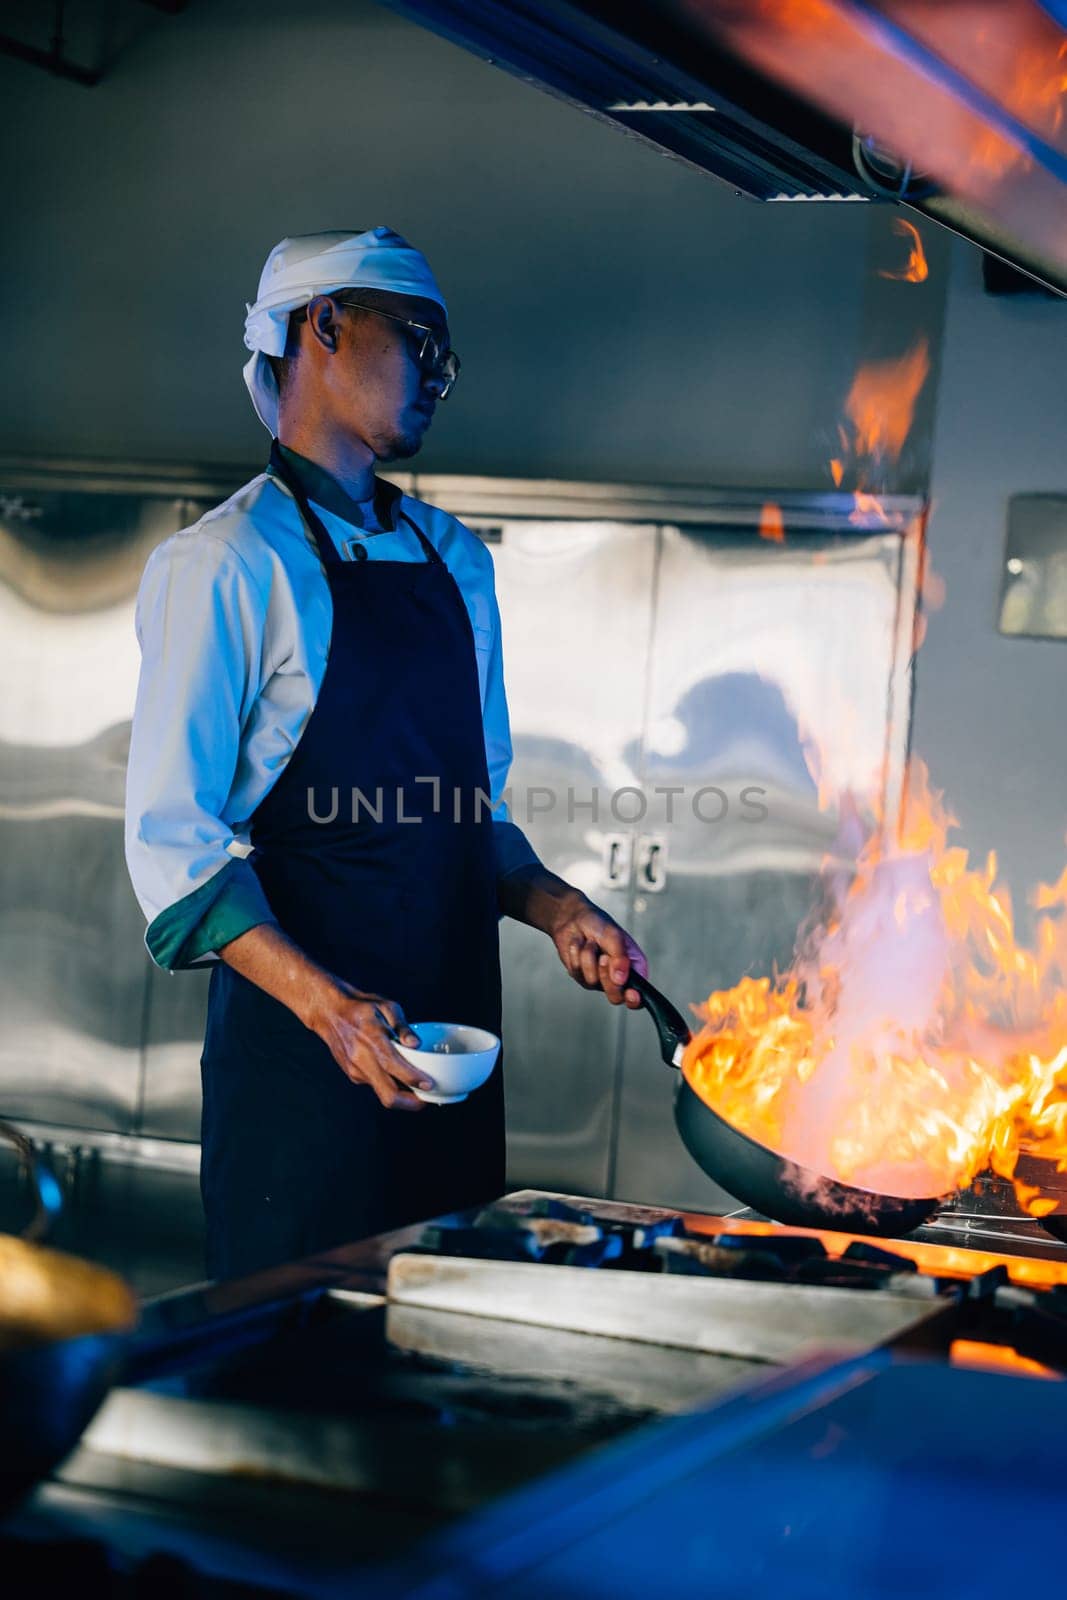 Chef hands expertly manage flaming wok in professional kitchen. Closeup of culinary skill flames cooking food. Busy chef handles flames in modern kitchen setting. cook food with fire by Sorapop